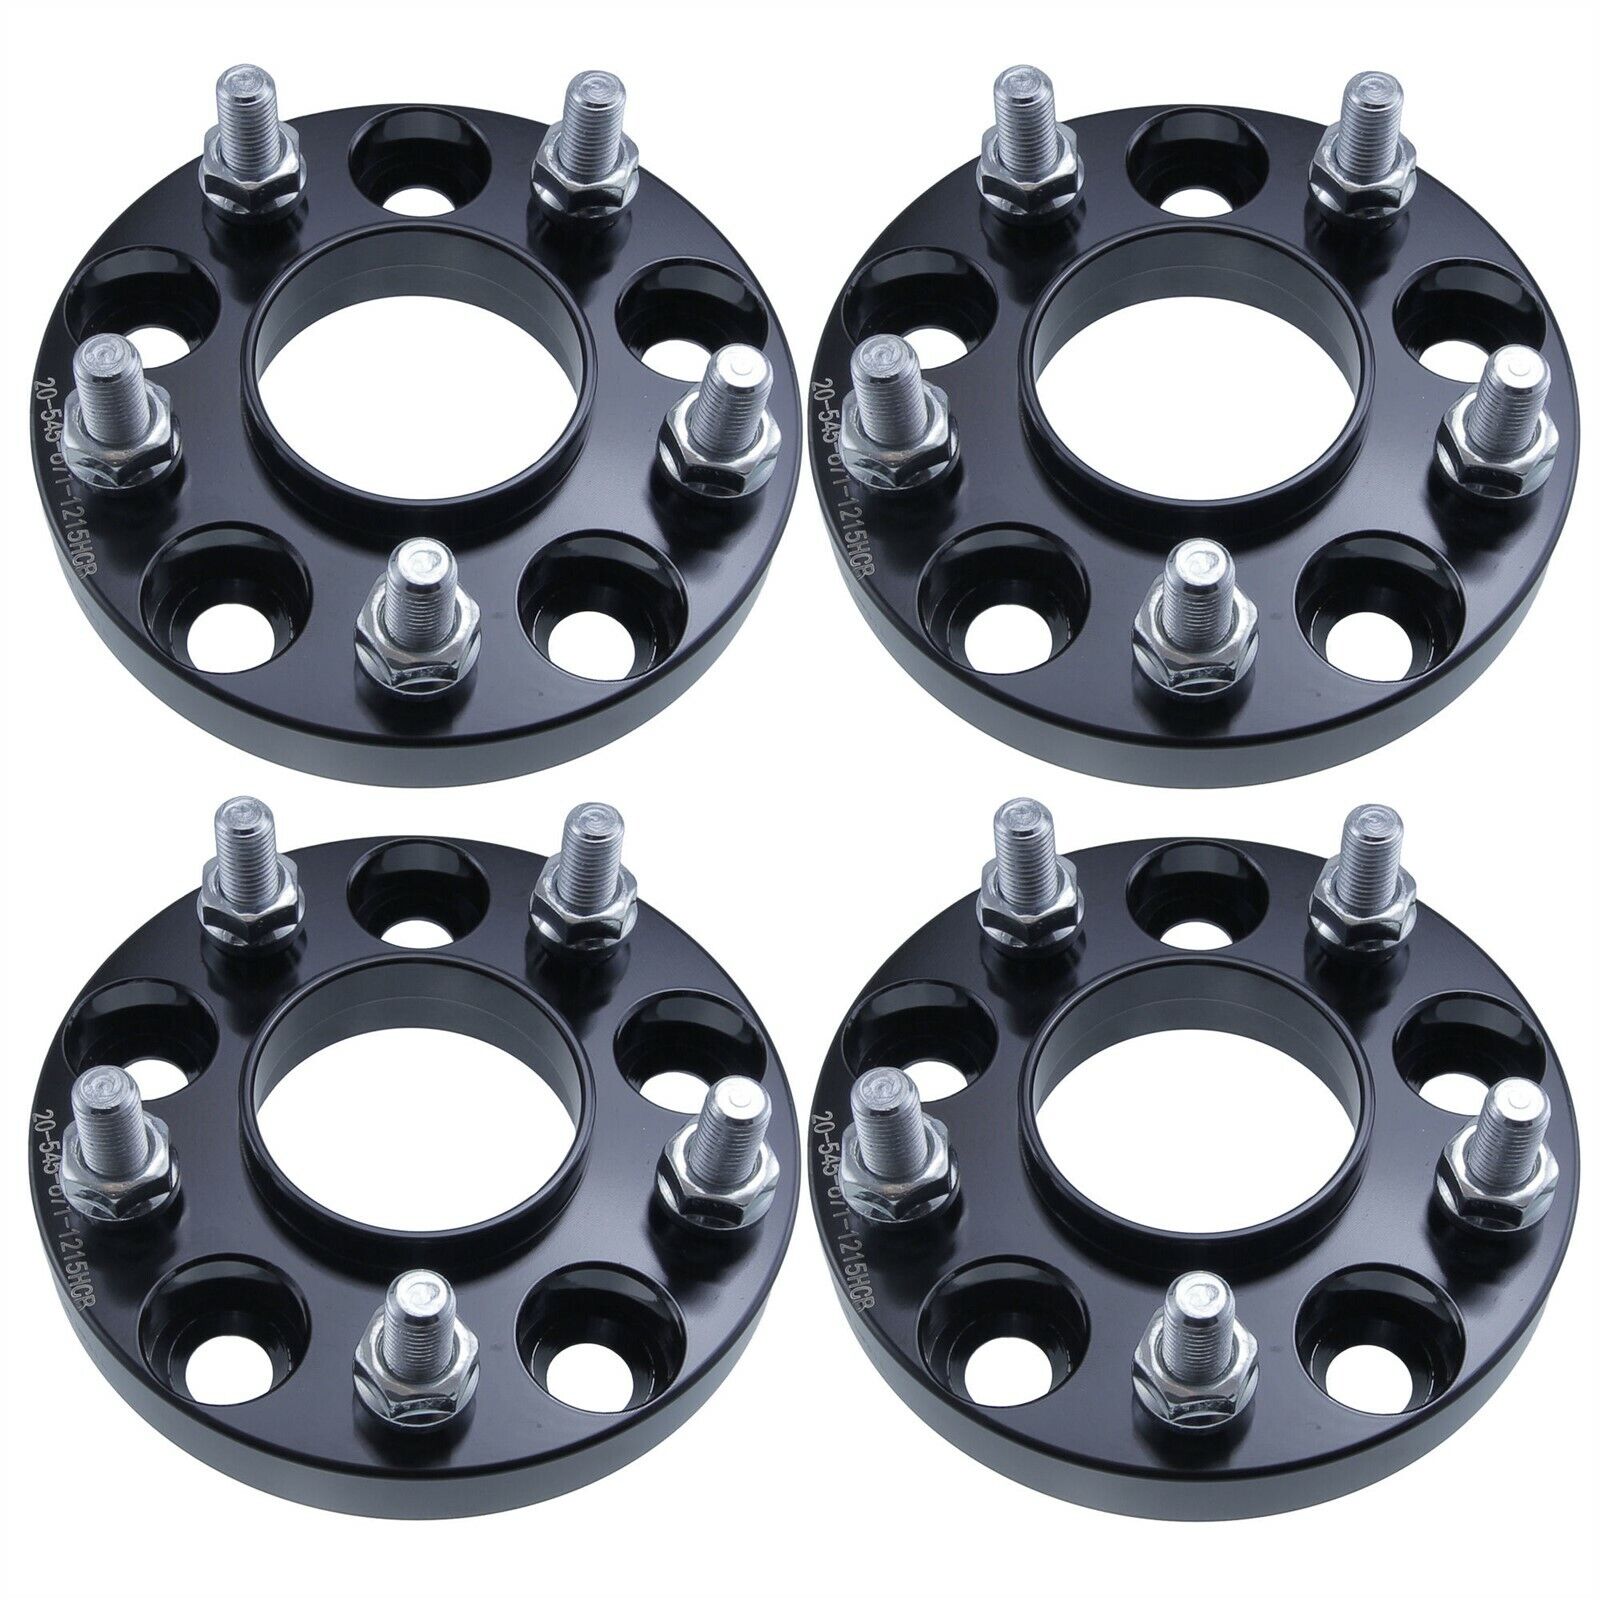 4pcs 15mm Hubcentric 5x4.5 Wheel Spacers fits Mitsubishi Eclipse Galant Lancer